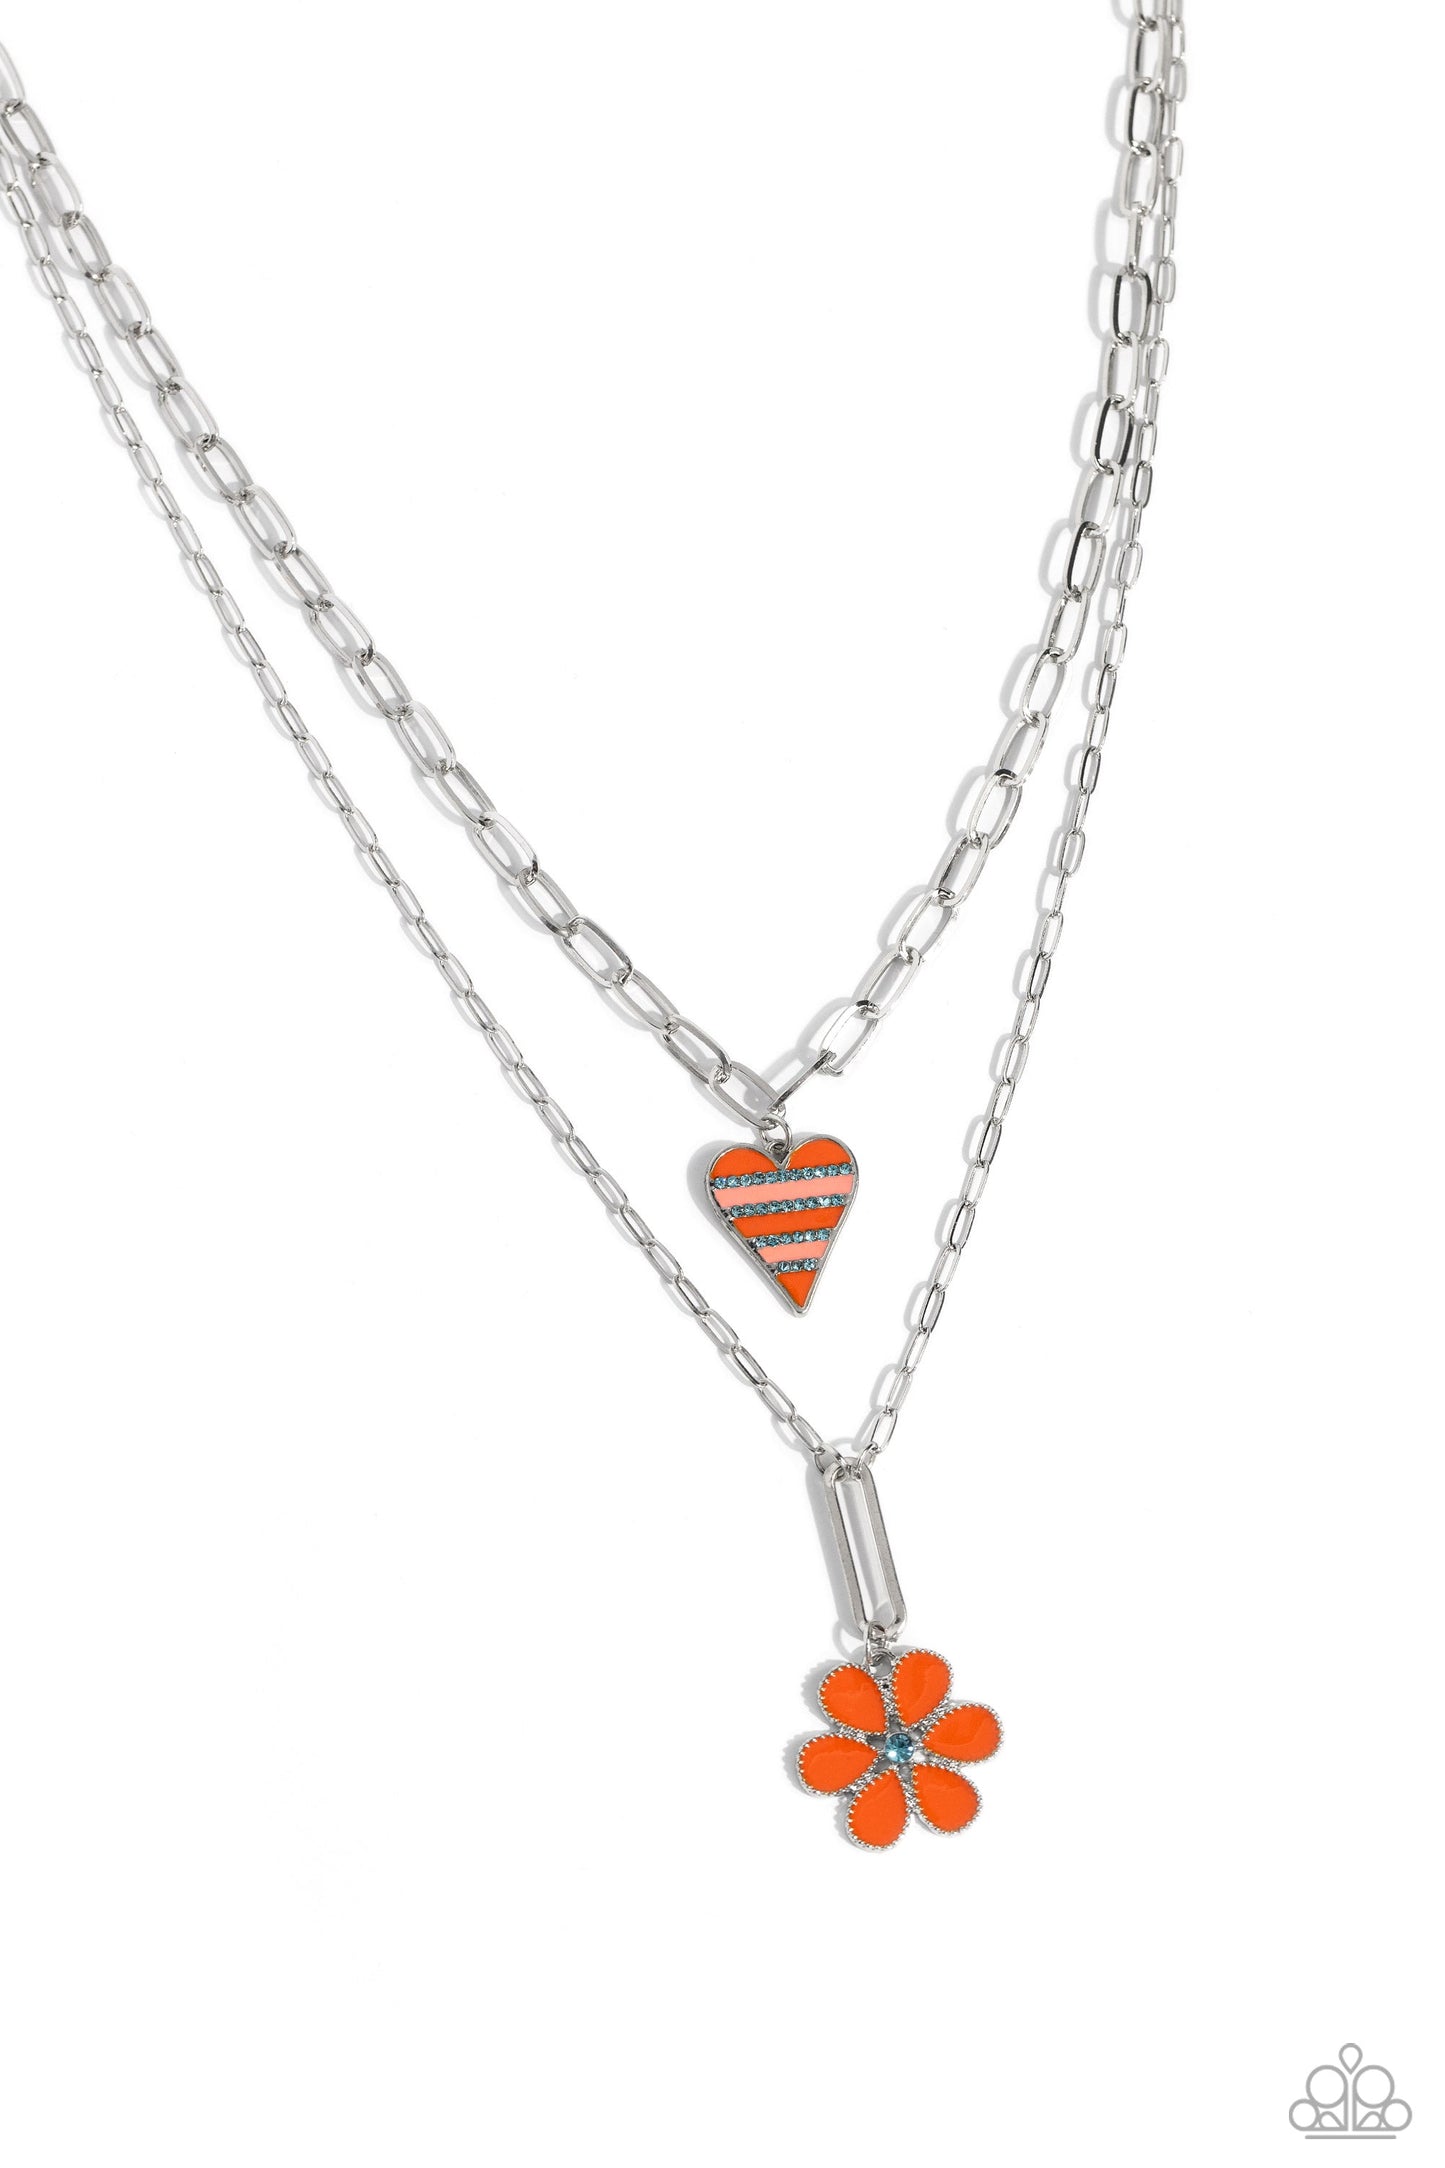 Childhood Charms - Orange Flower/Heart Charm Paparazzi Necklace & matching earrings